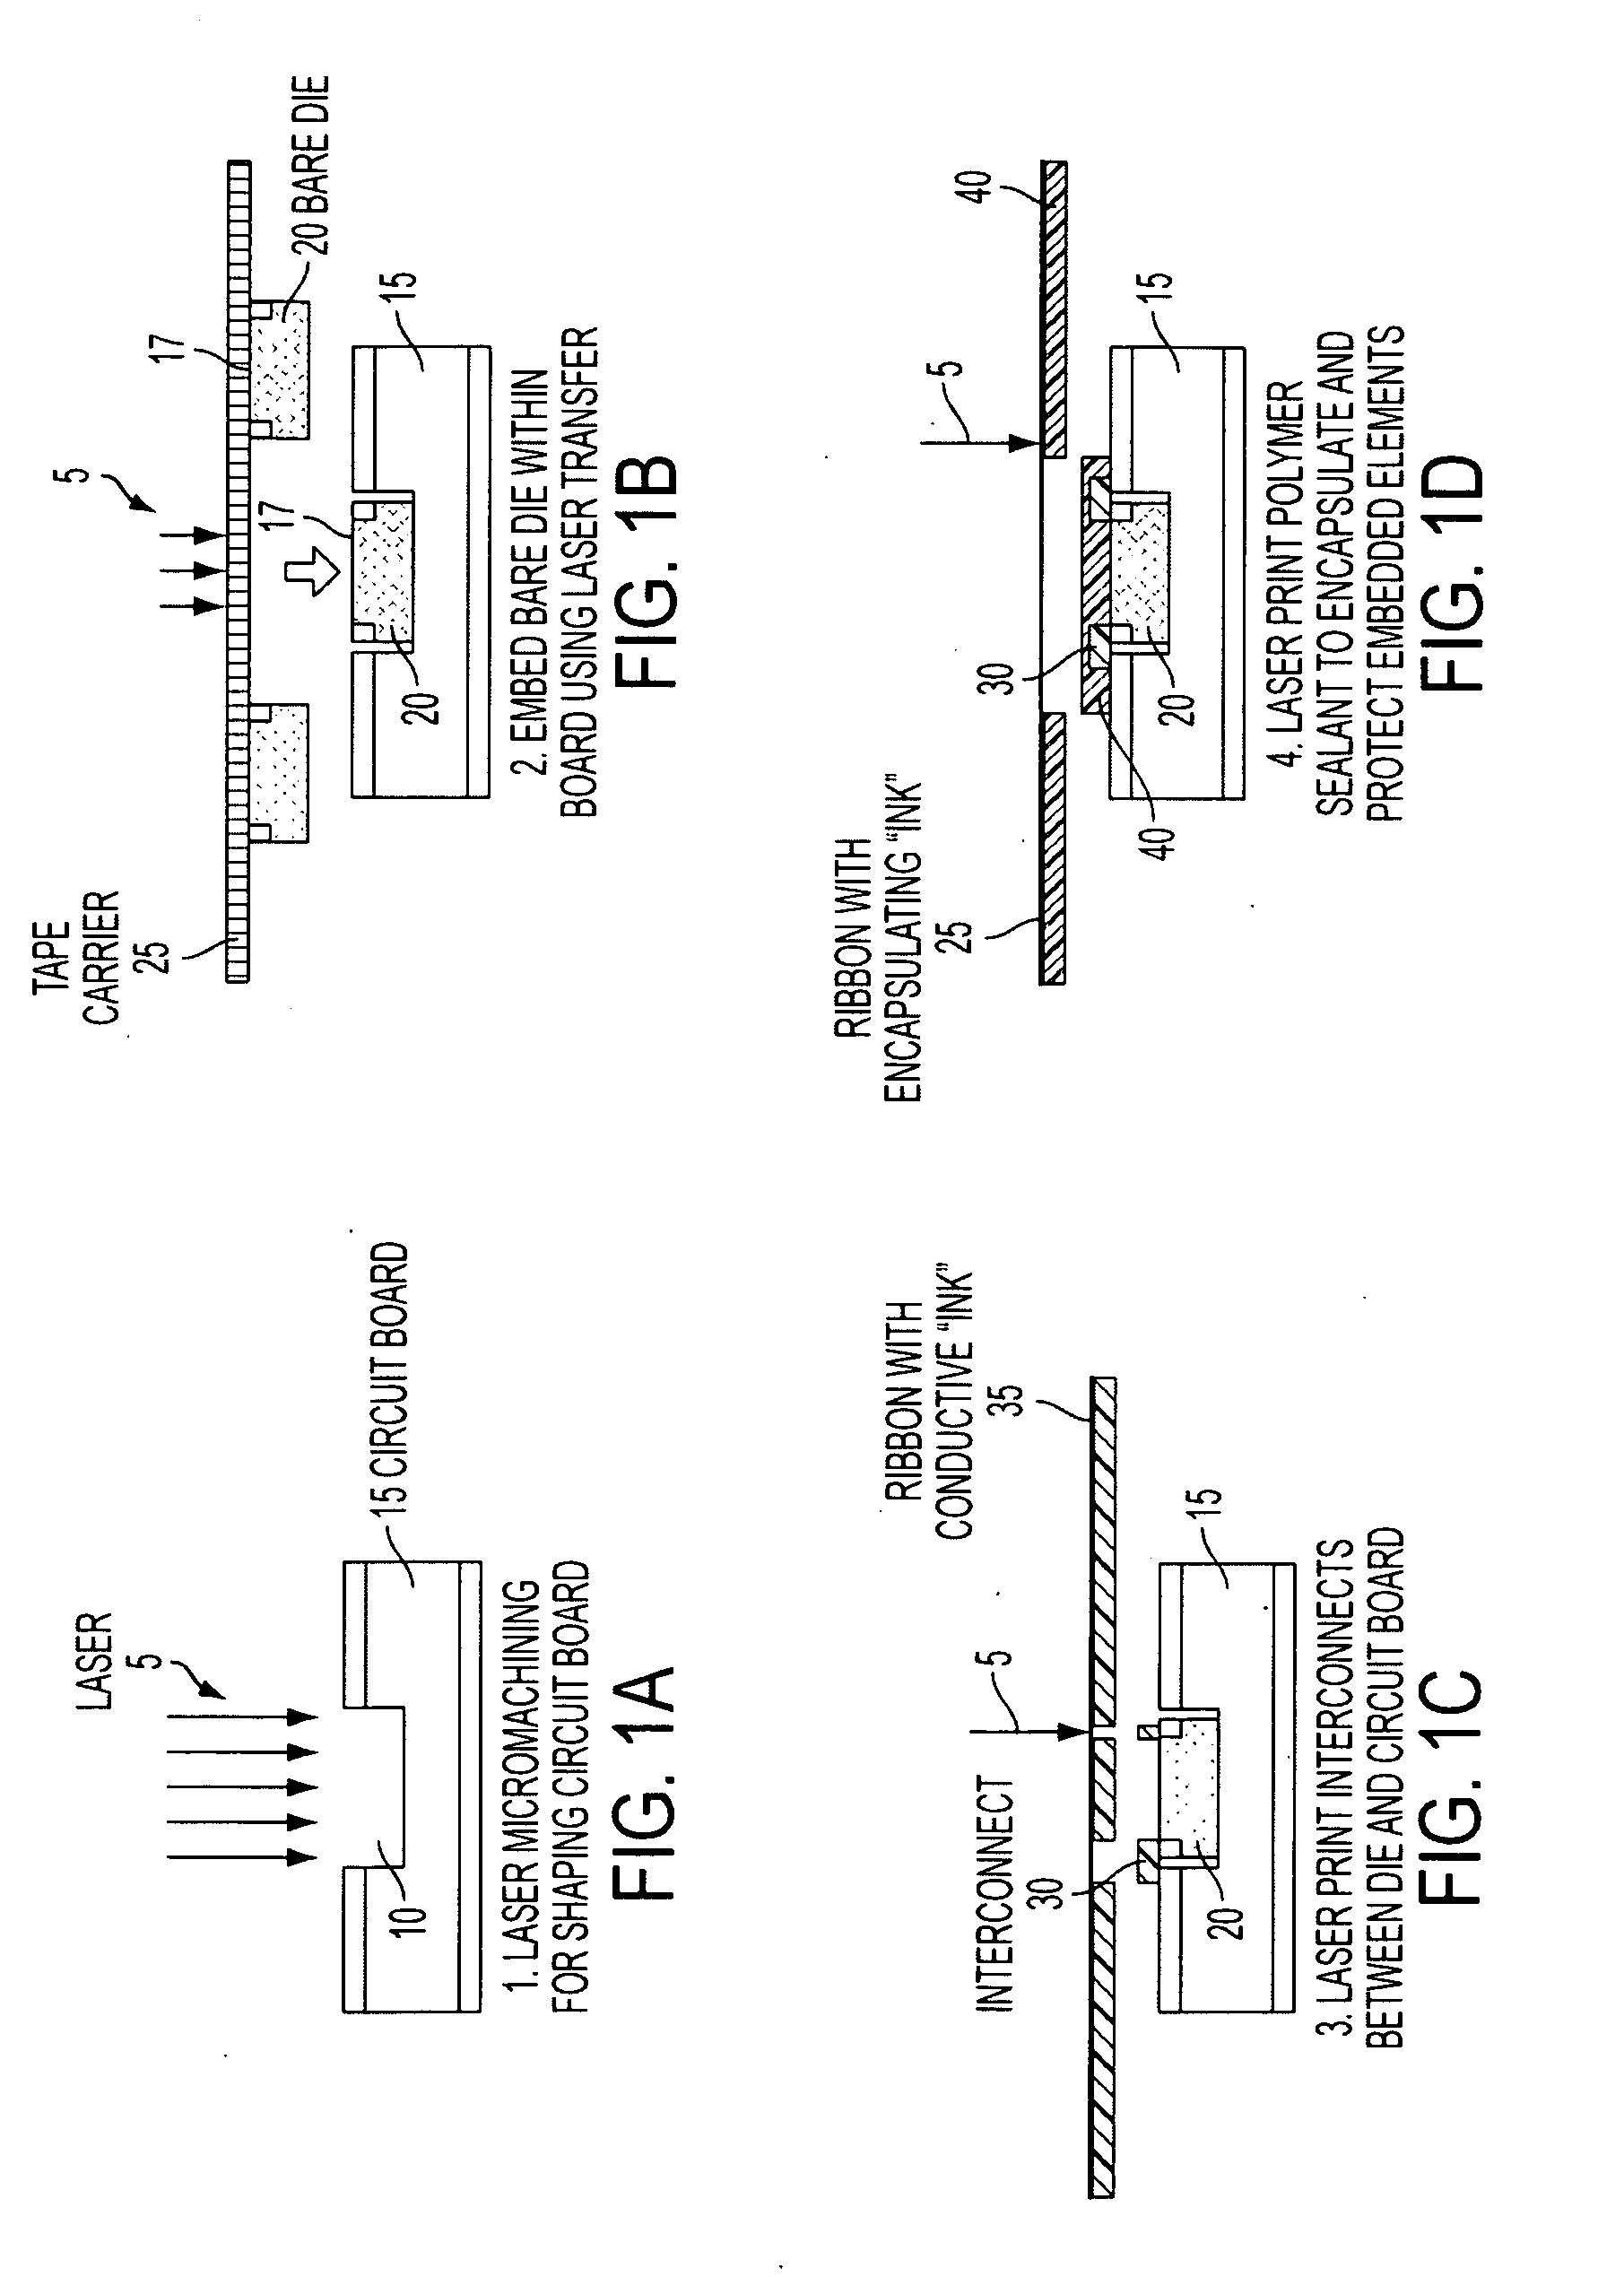 Laser-based technique for the transfer and embedding of electronic components and devices